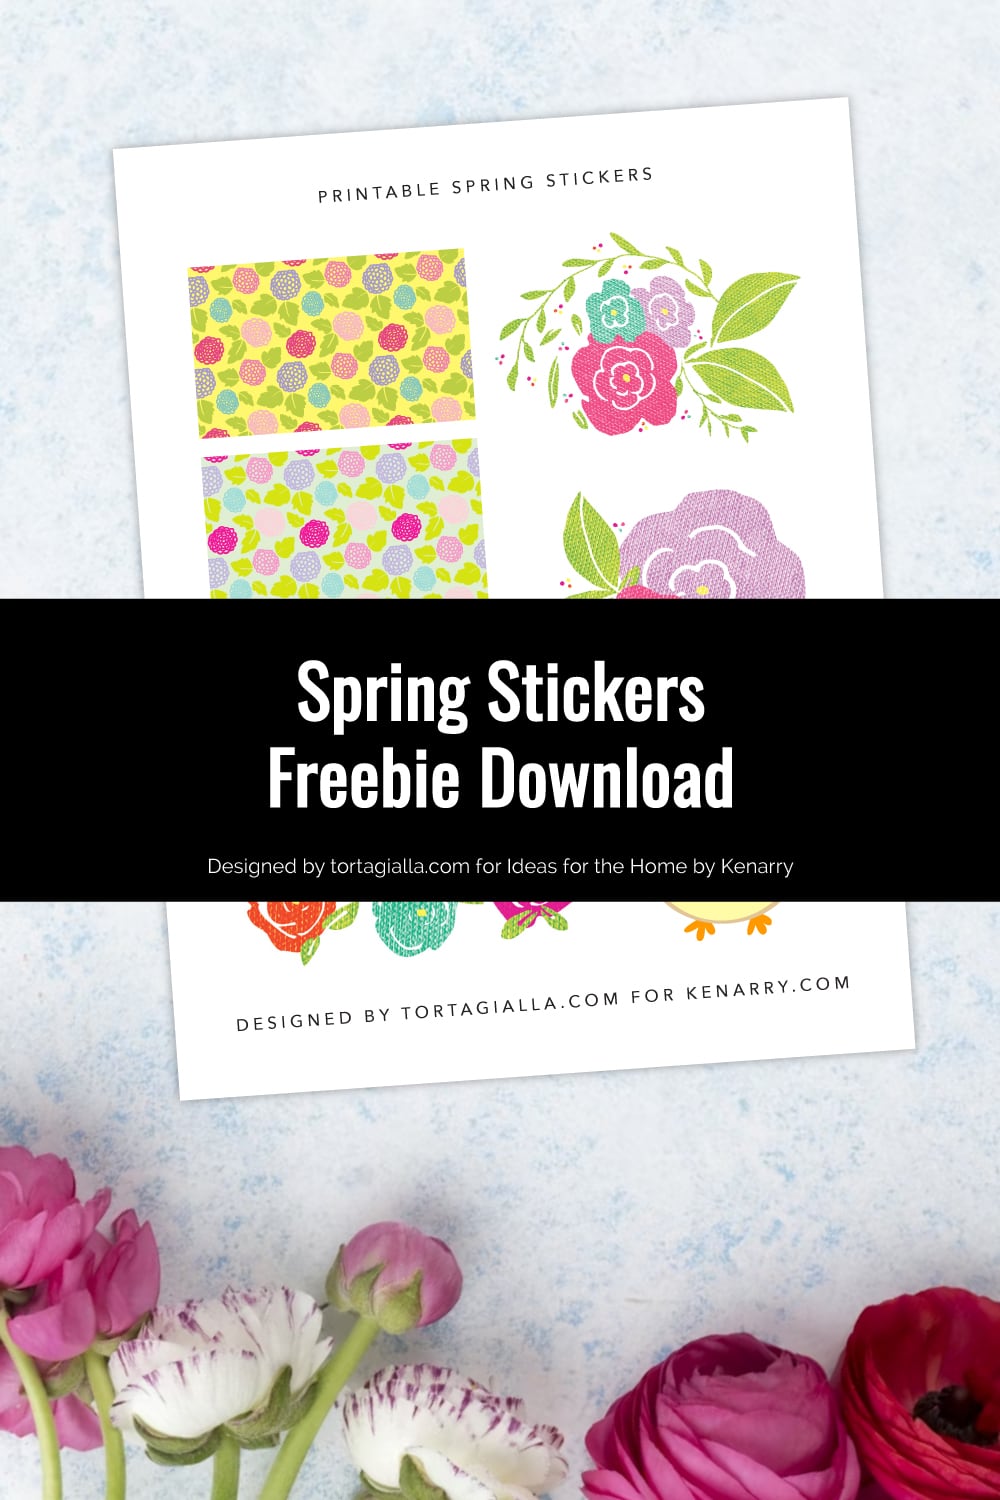 Preview of spring stickers printable page on top of countertop with row of white and pink flowers on the bottom.